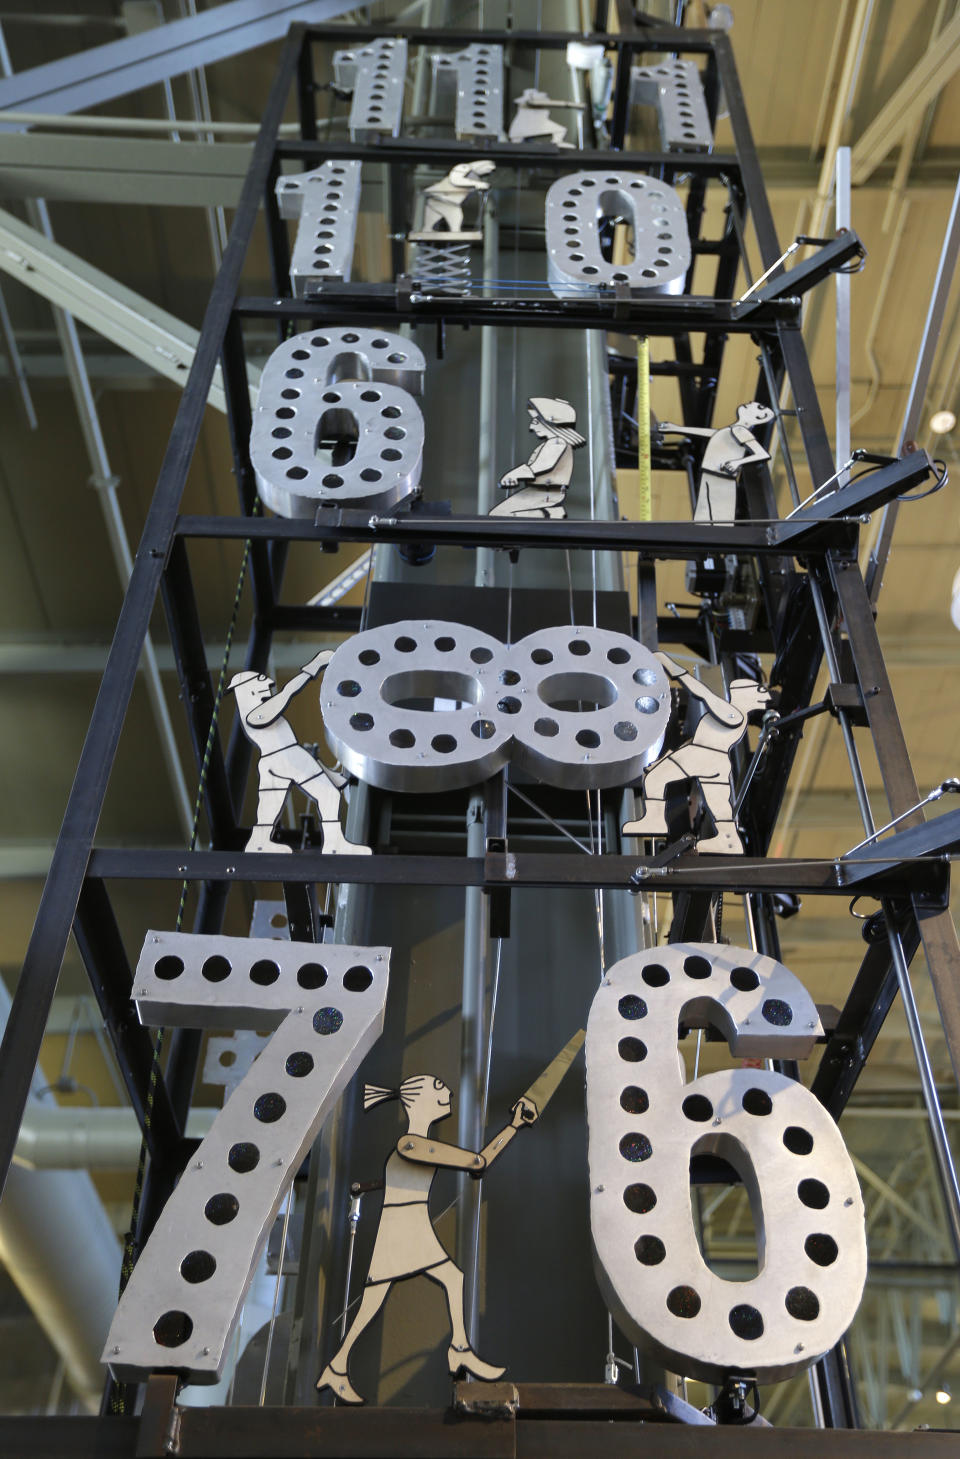 An exhibit called the Tinkerer's Clock is shown at the Exploratorium, an interactive science and activities museum, during a preview in San Francisco, Tuesday, April 9, 2013. The new $300 million museum is set to open April 17 at its new location along the bay with more space and new exhibits. The 330,000-square-foot museum at Pier 15 along the Embarcadero has three times more space than the previous location at the Palace of Fine Arts in the city's Marina neighborhood. (AP Photo/Eric Risberg)